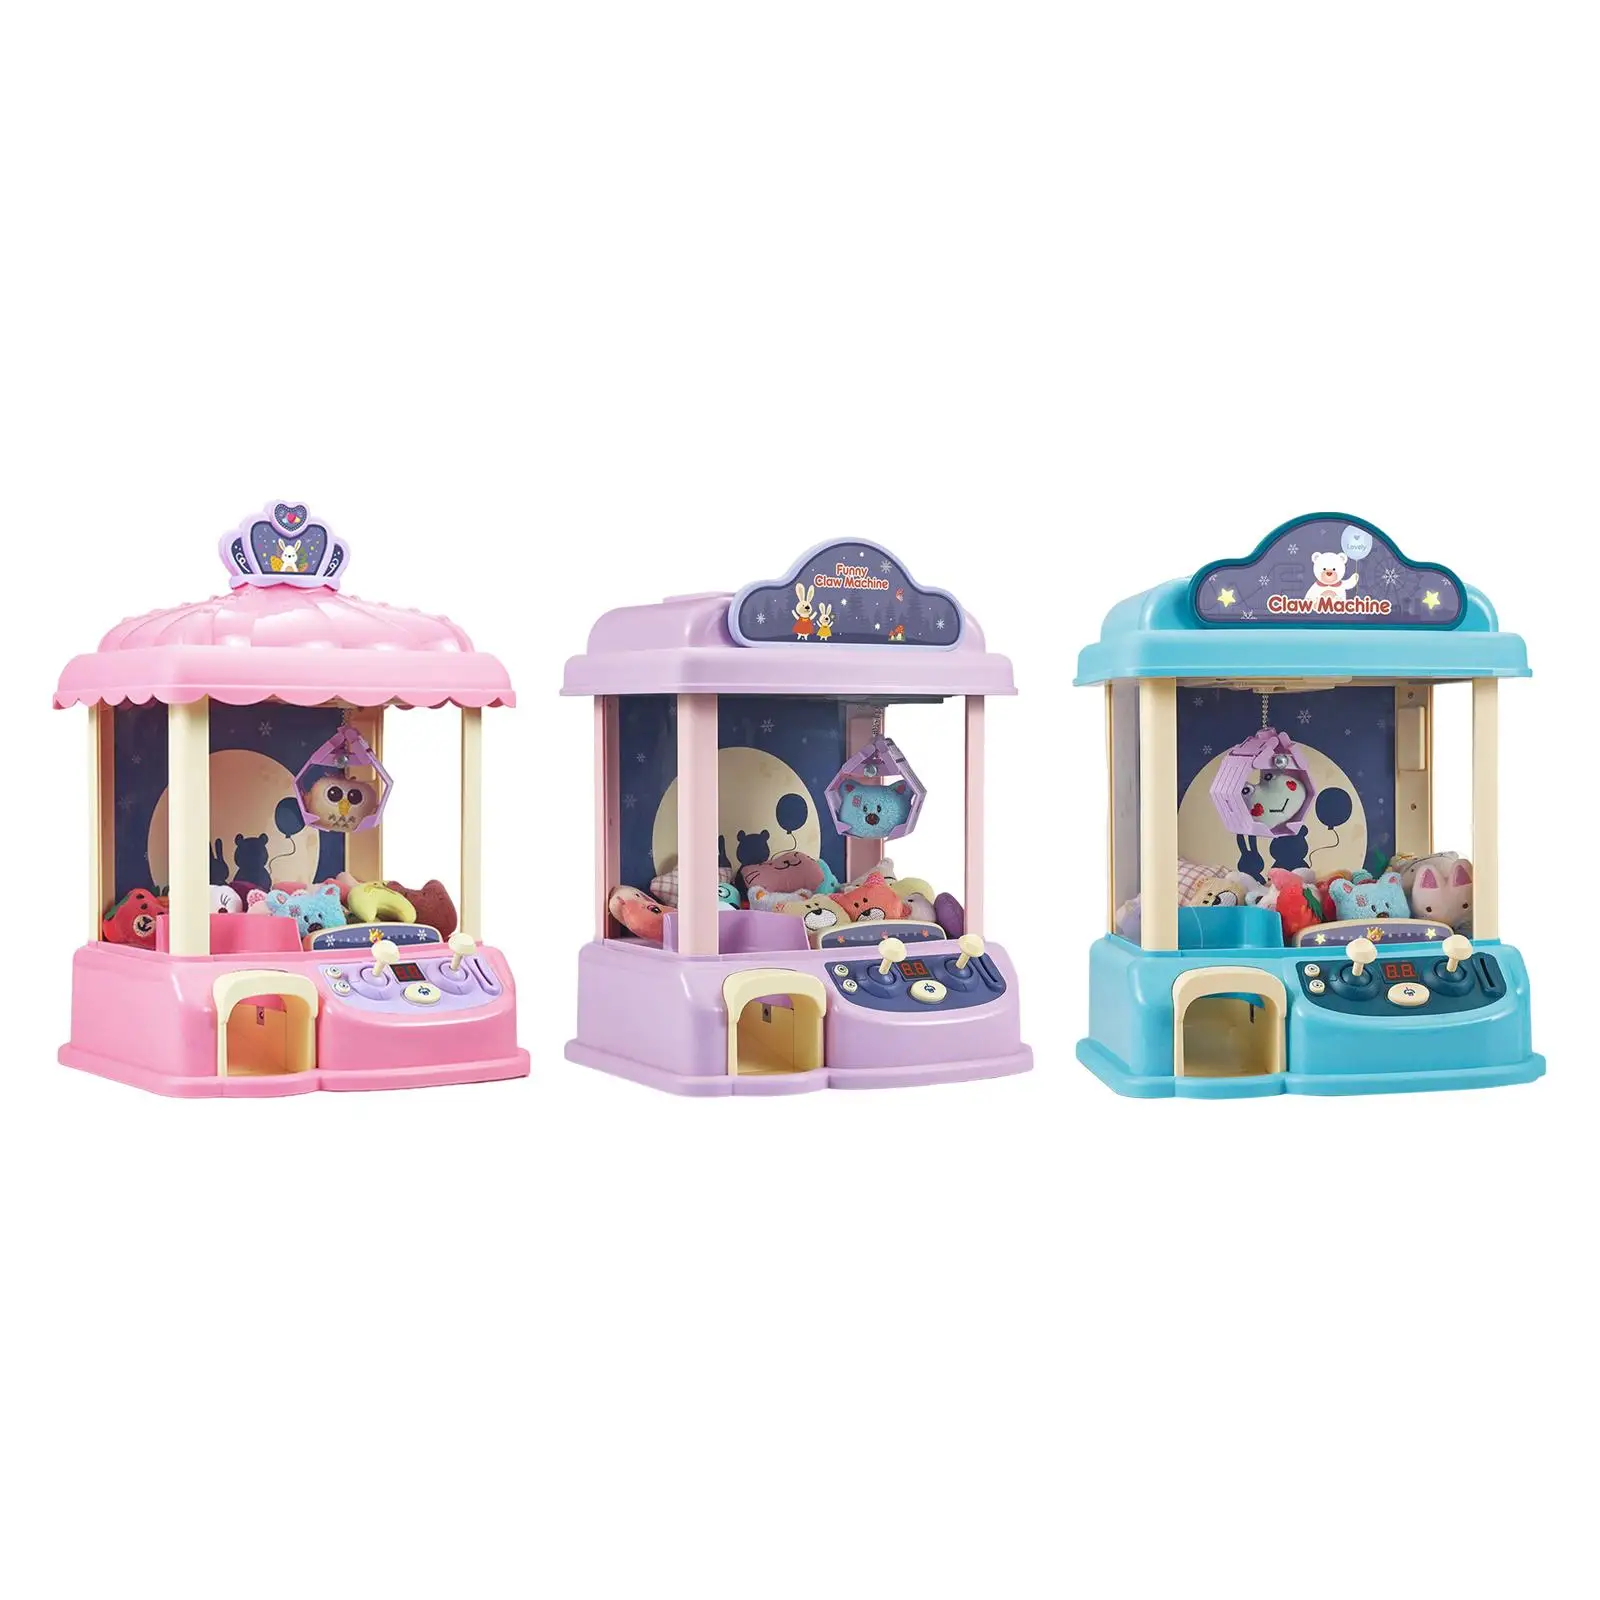 Arcade Game Birthday Gift Arcade Candy Capsule Claw Vending Machine with 6 Dolls Candy Grabber Claw Machine for kids Adults